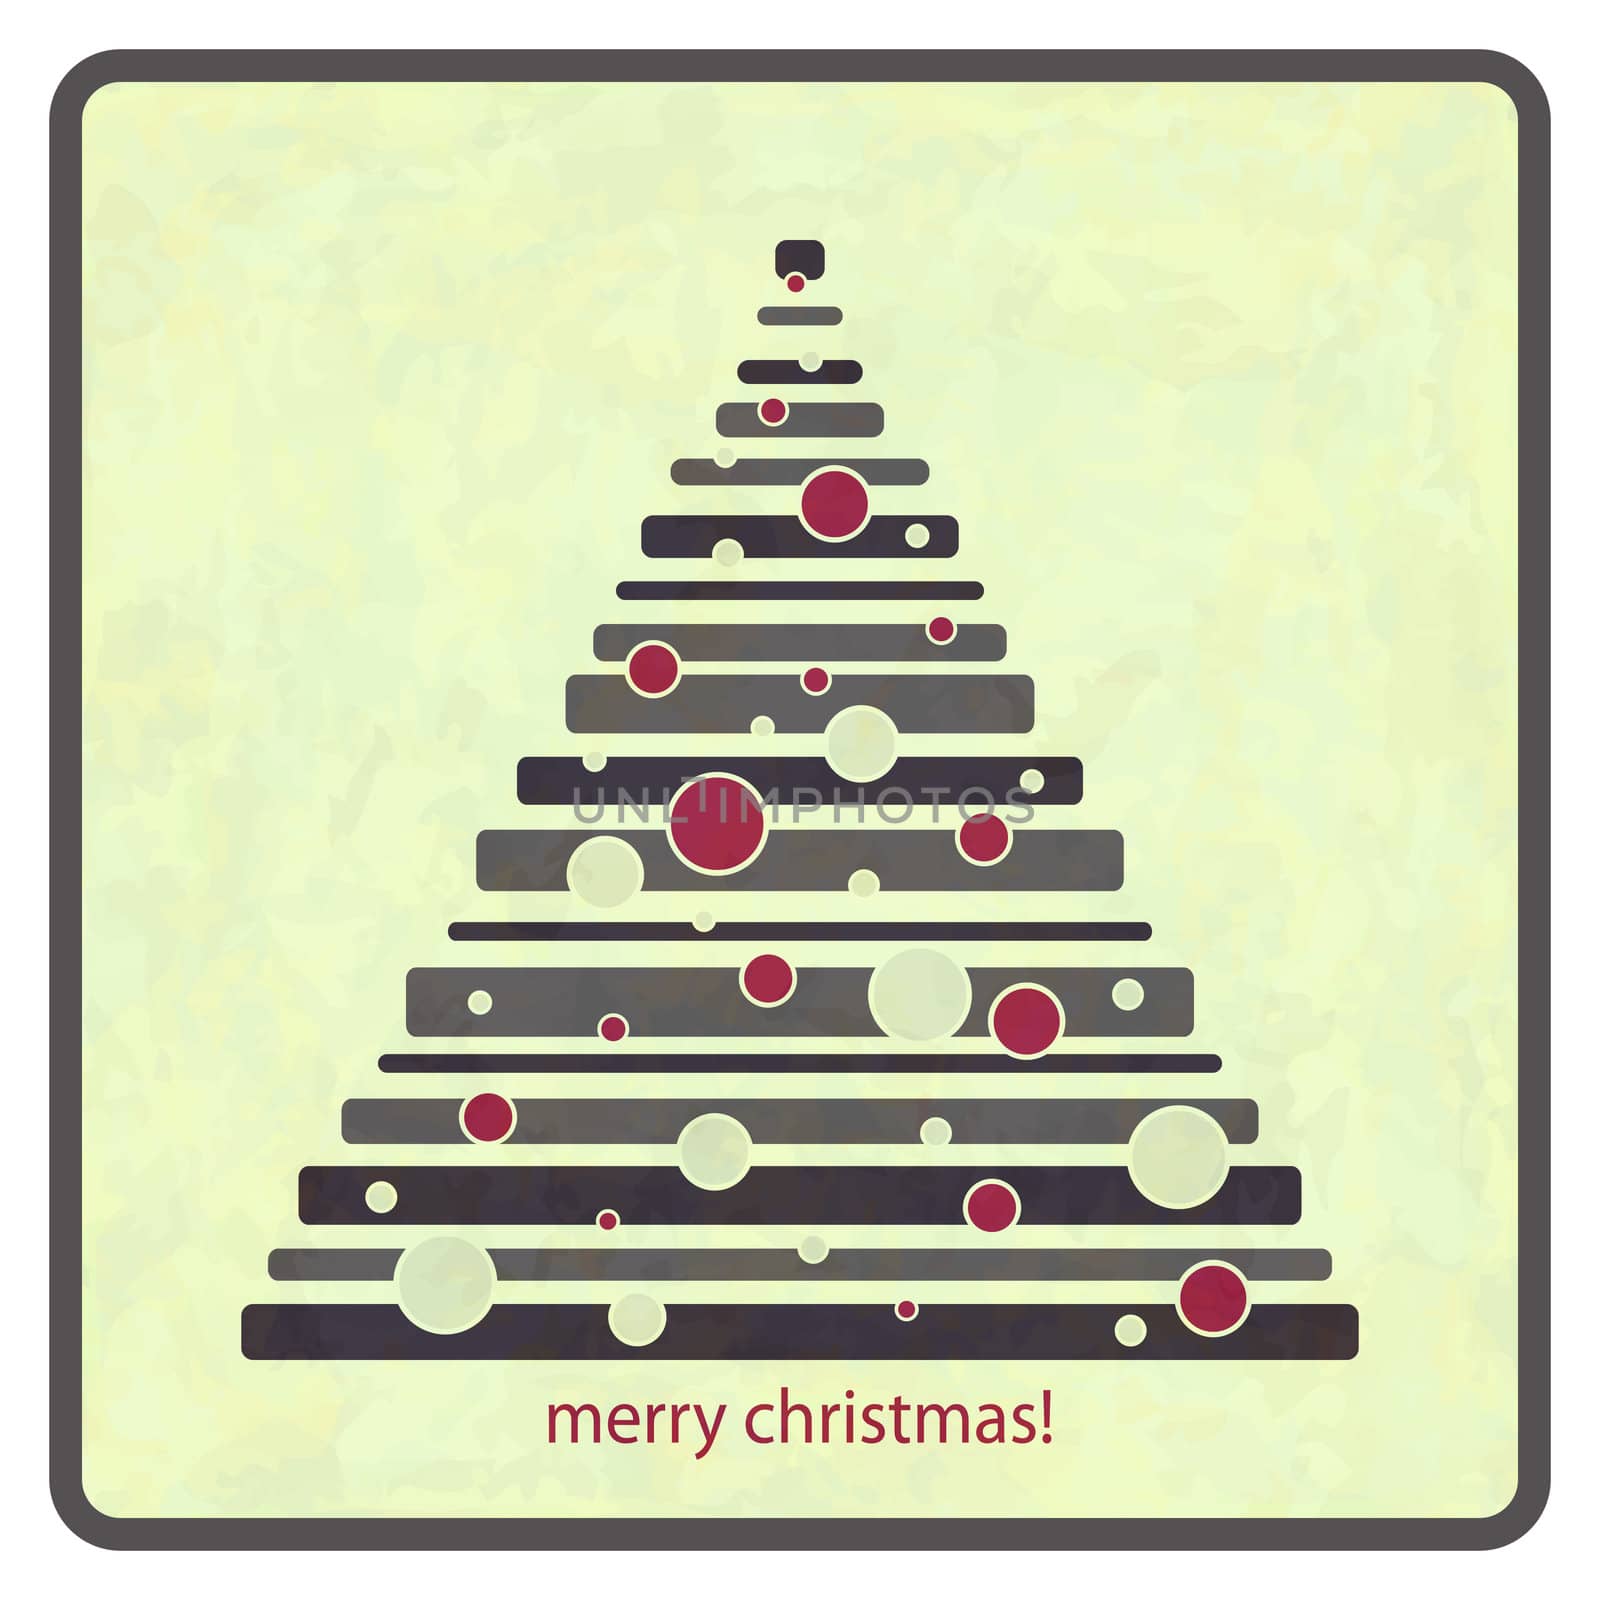 retro style royalty free illustration of winter tree with red balls and greetings